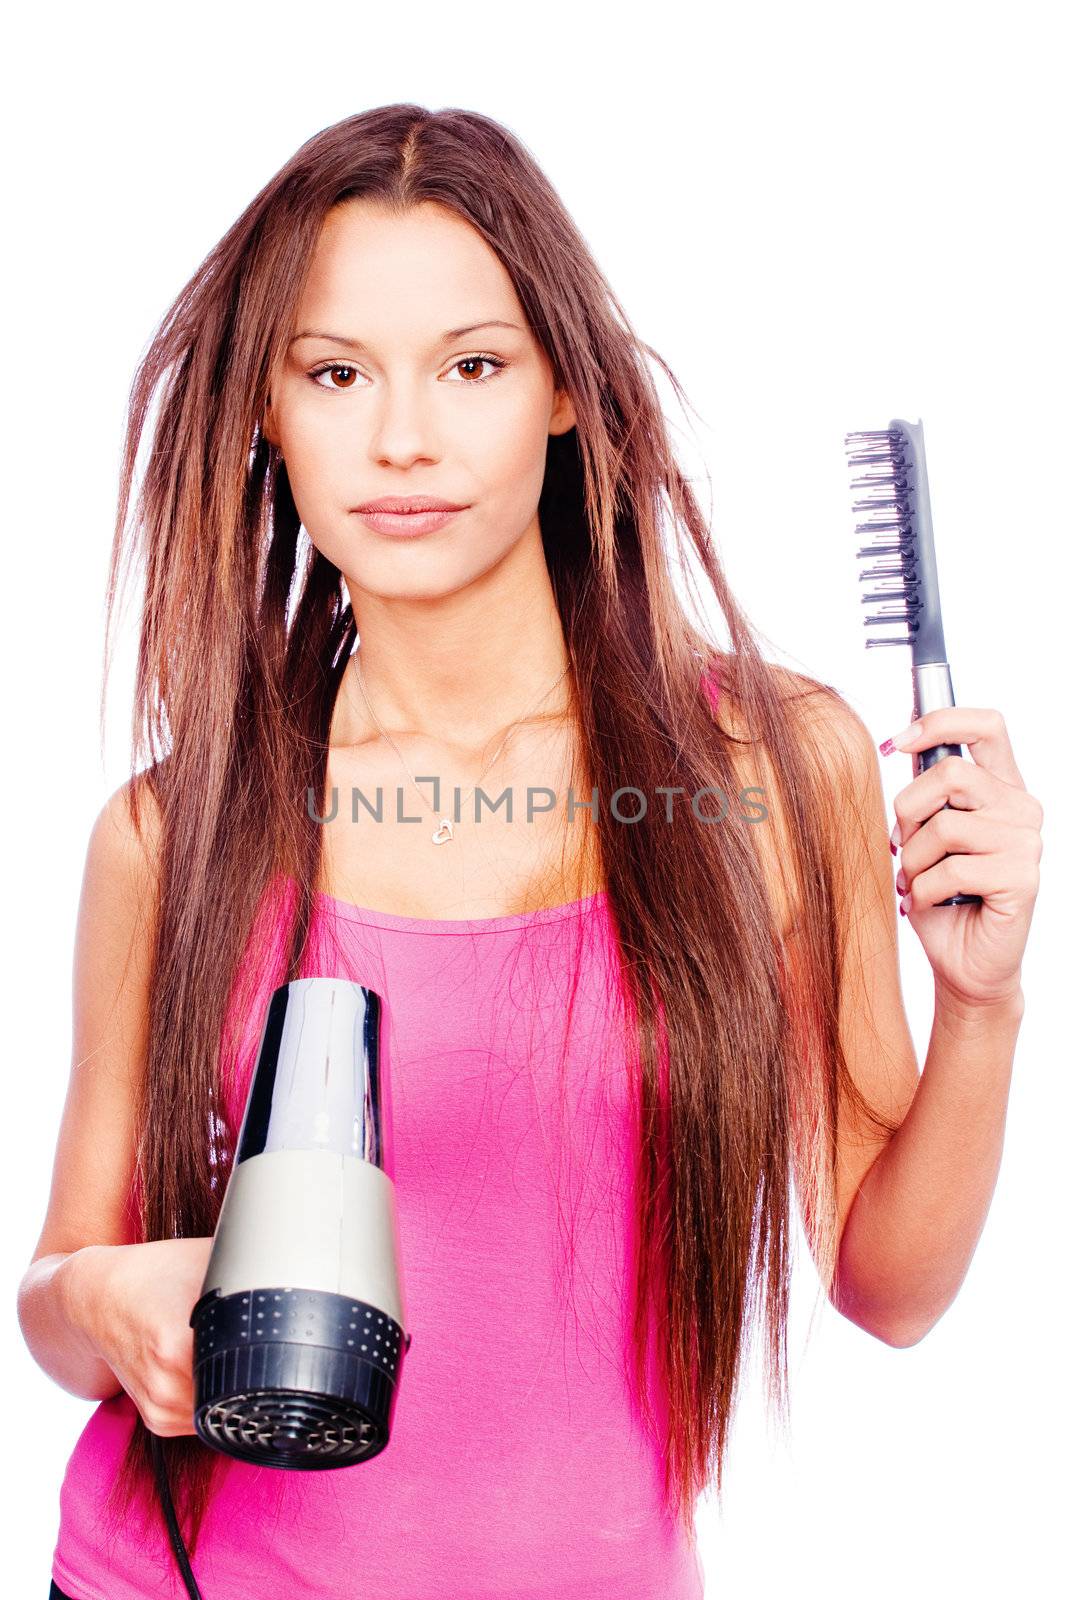 woman with long hair holding blow dryer and comb, isolated on white